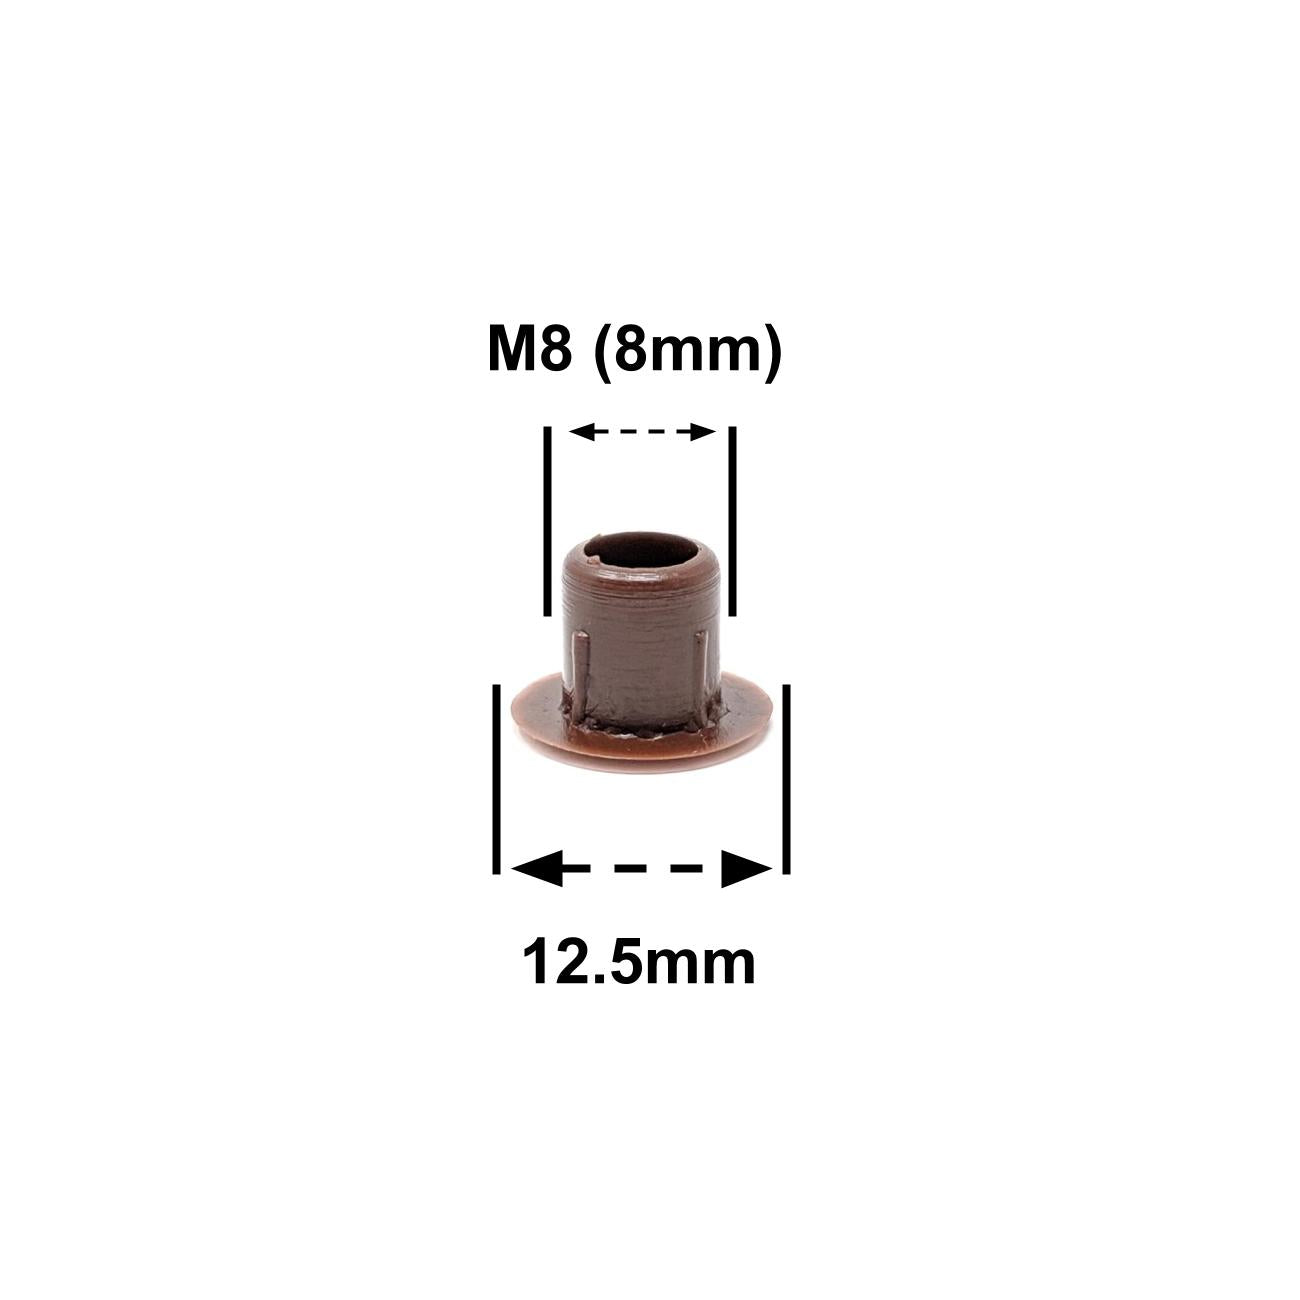 M8 Brown Plastic Hole Plugs, Made in Germany - Keay Vital Parts